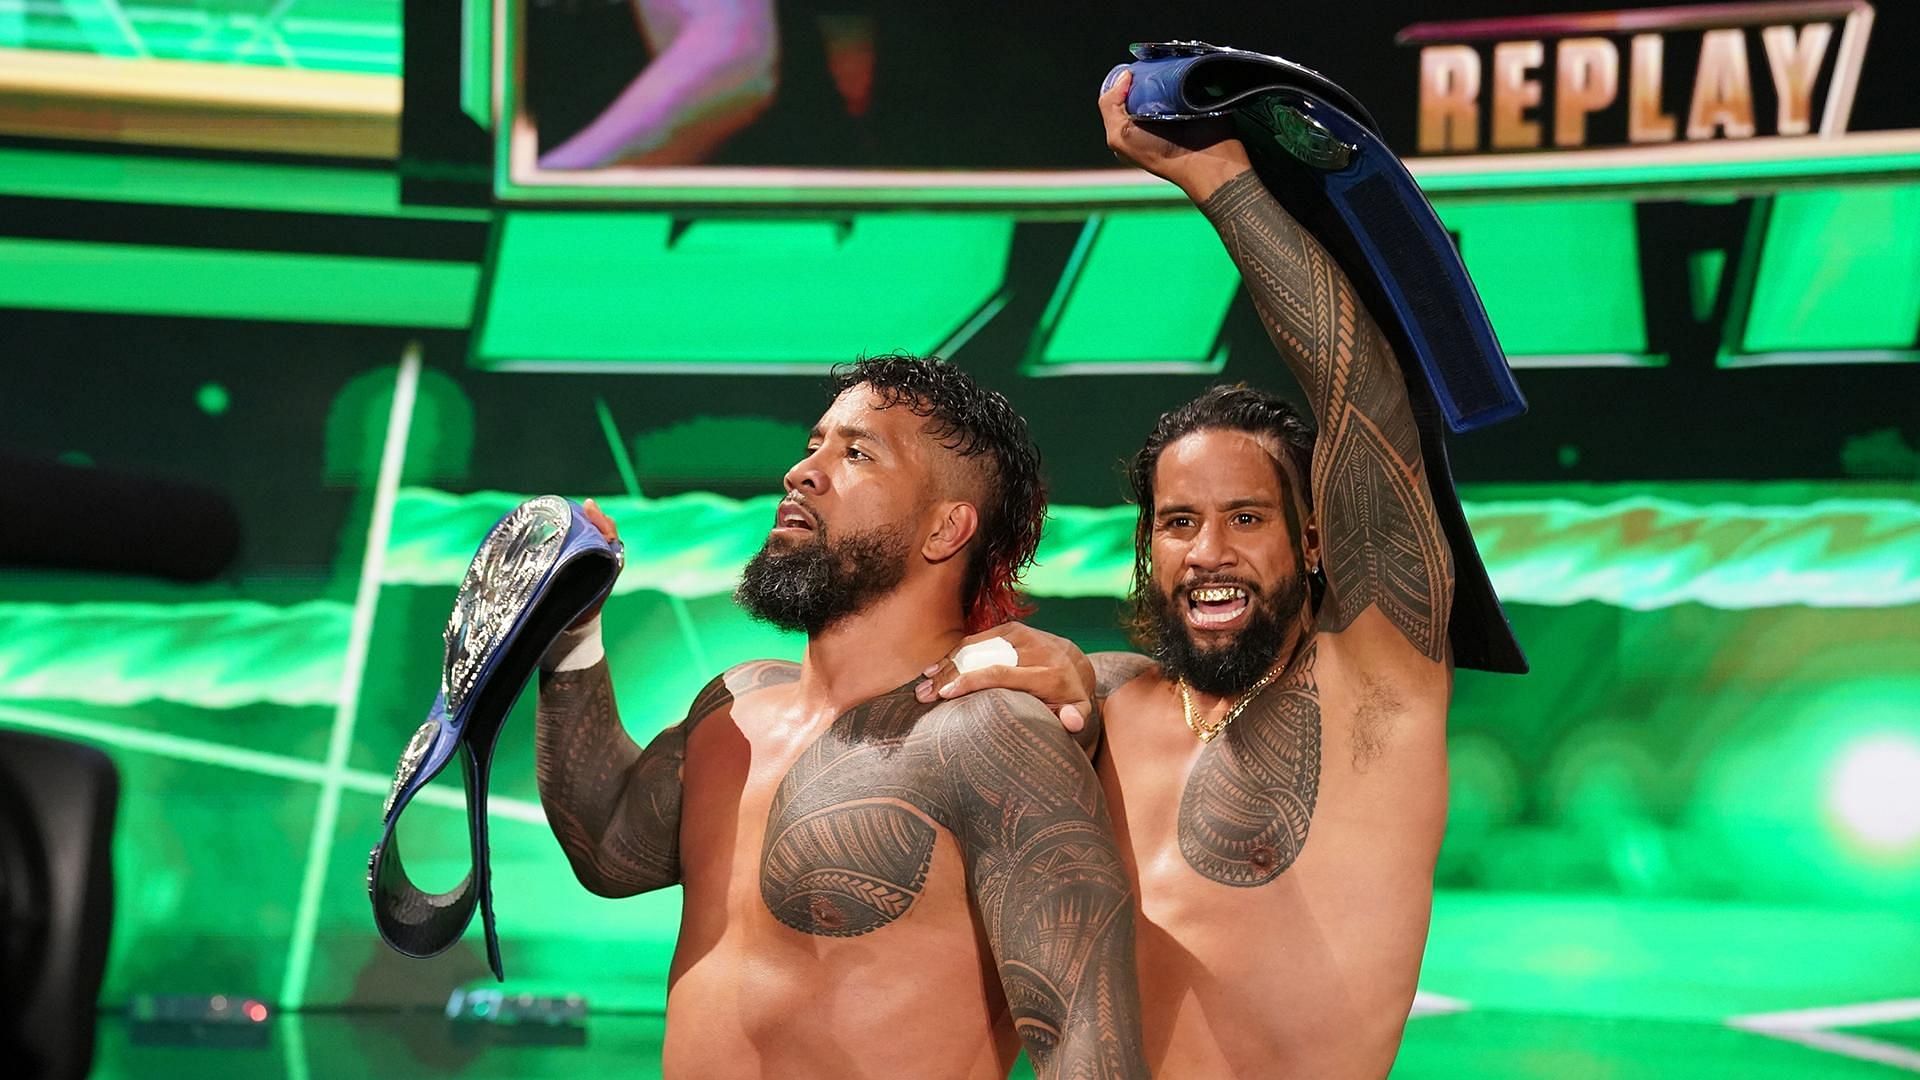 SmackDown Tag Team Champions The Usos